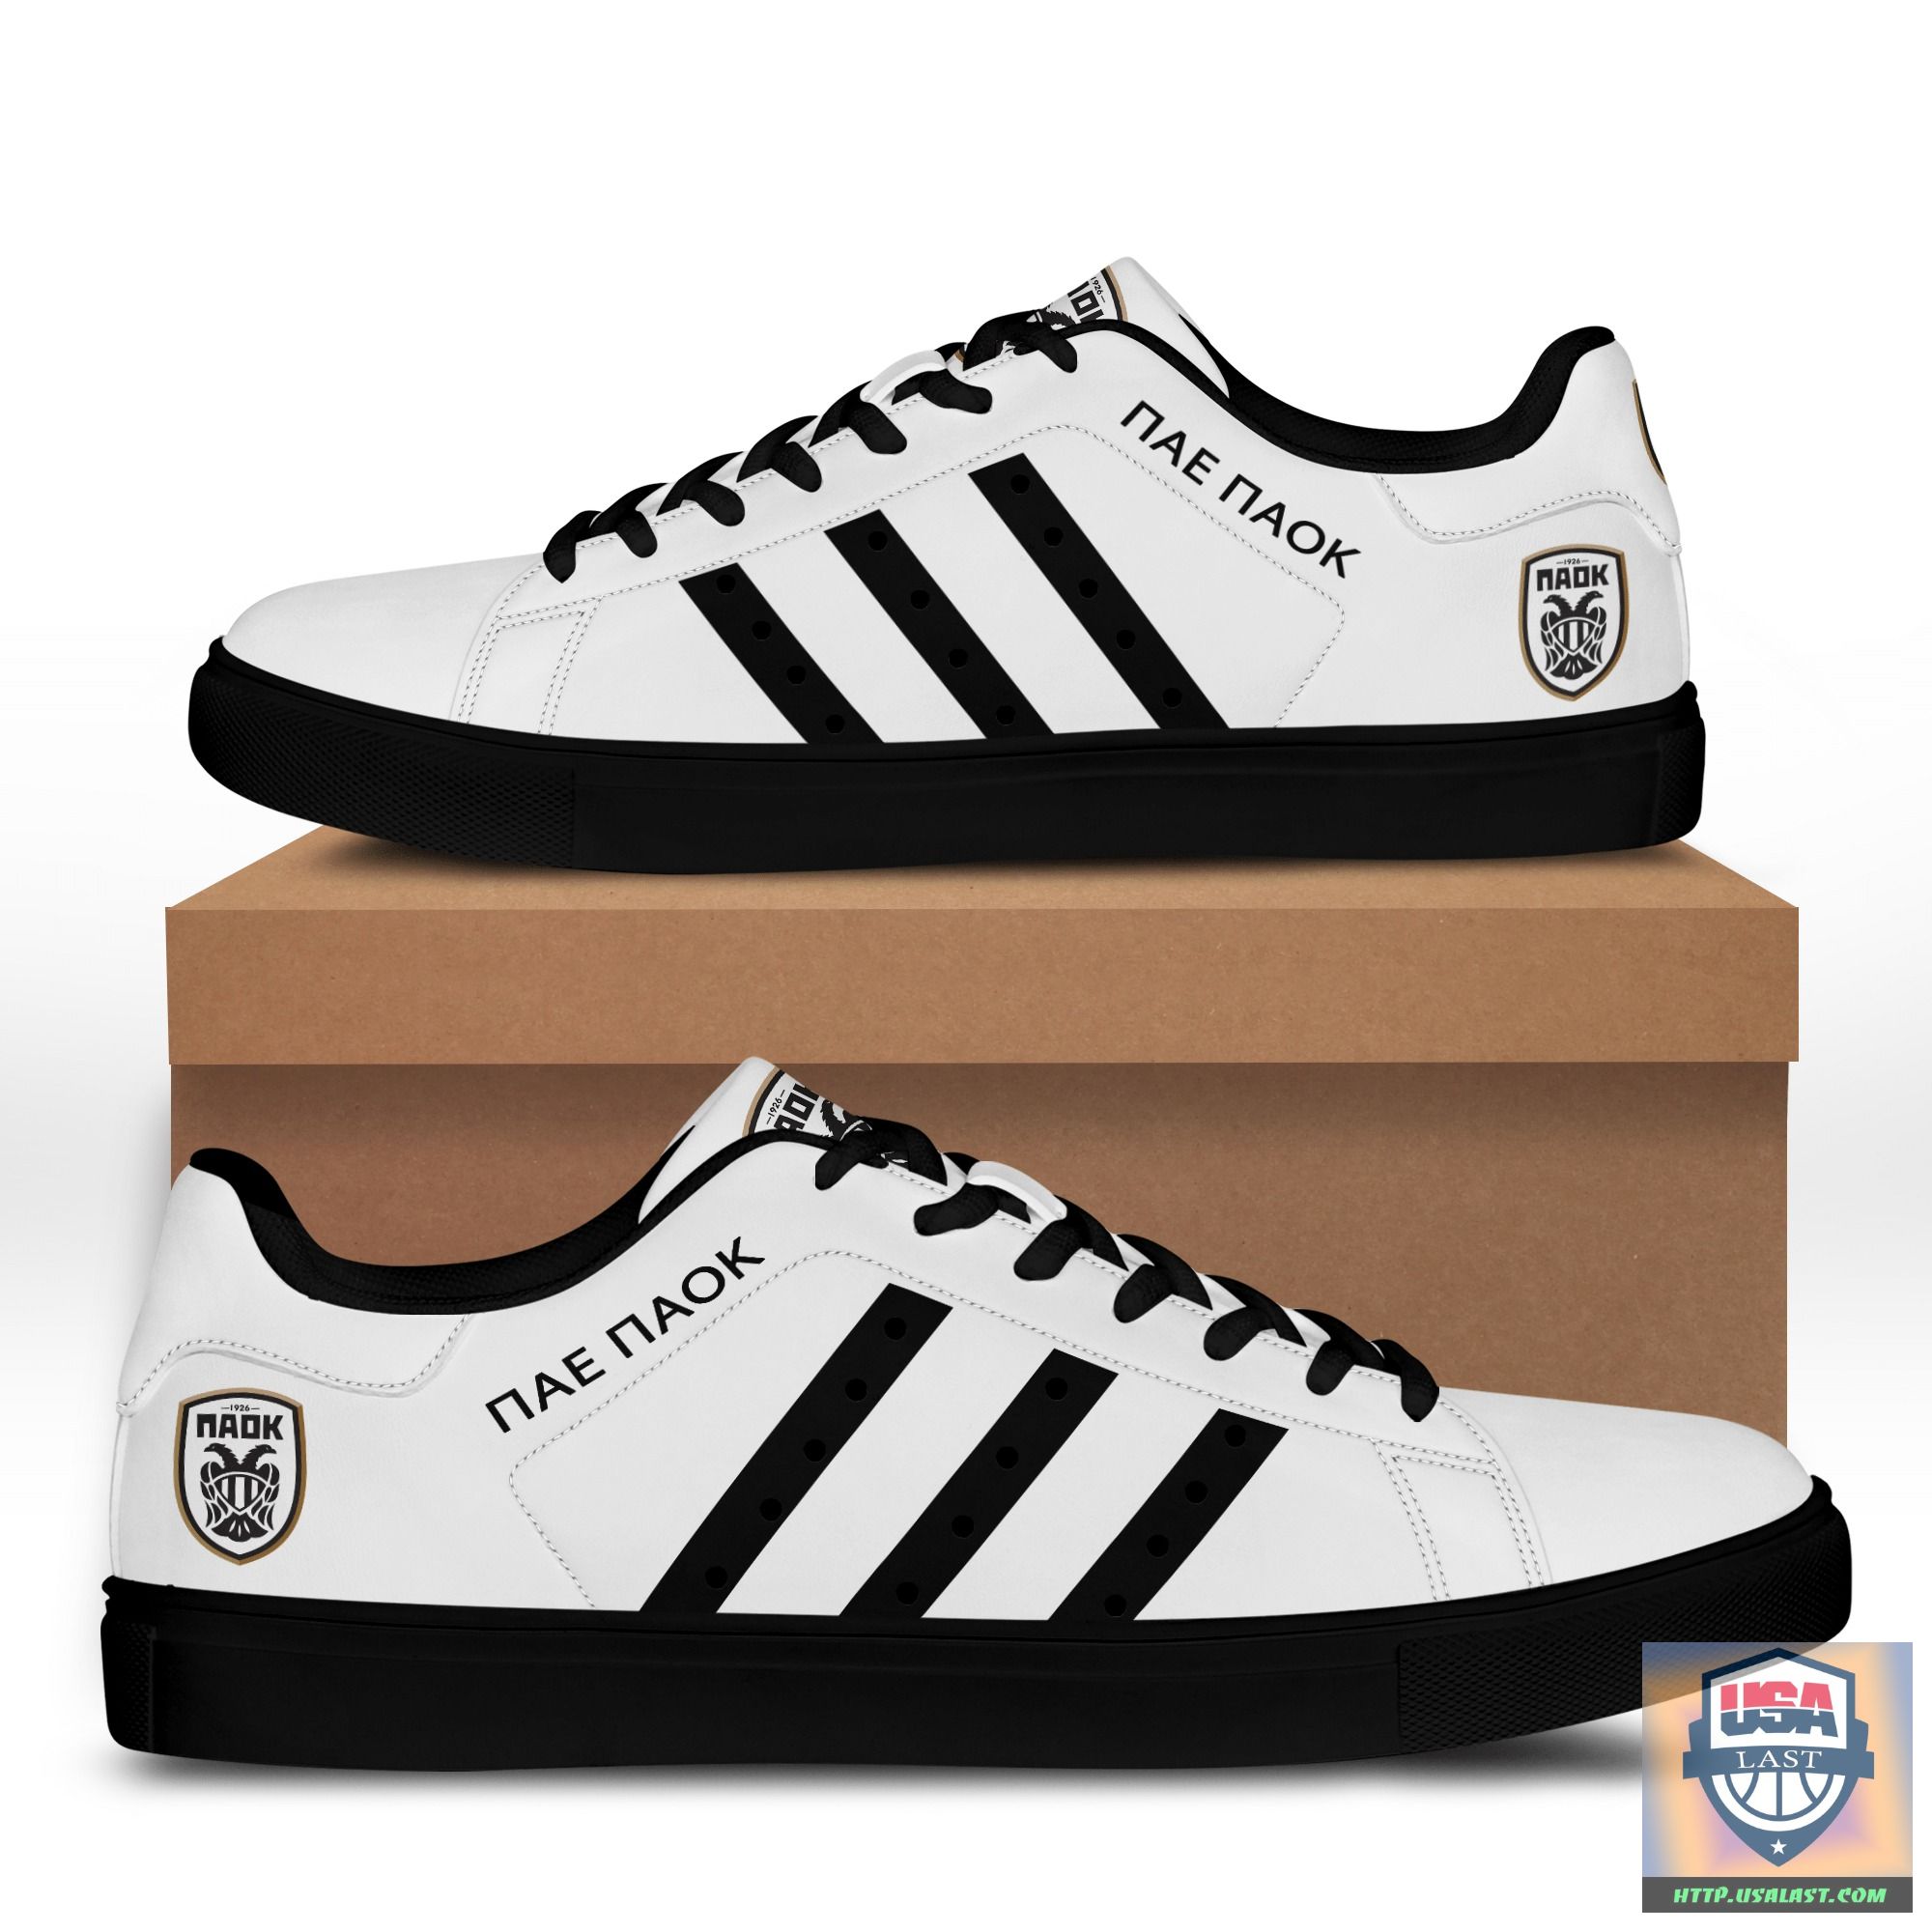 Paok FC Black Stripe Low Top Shoes – Usalast